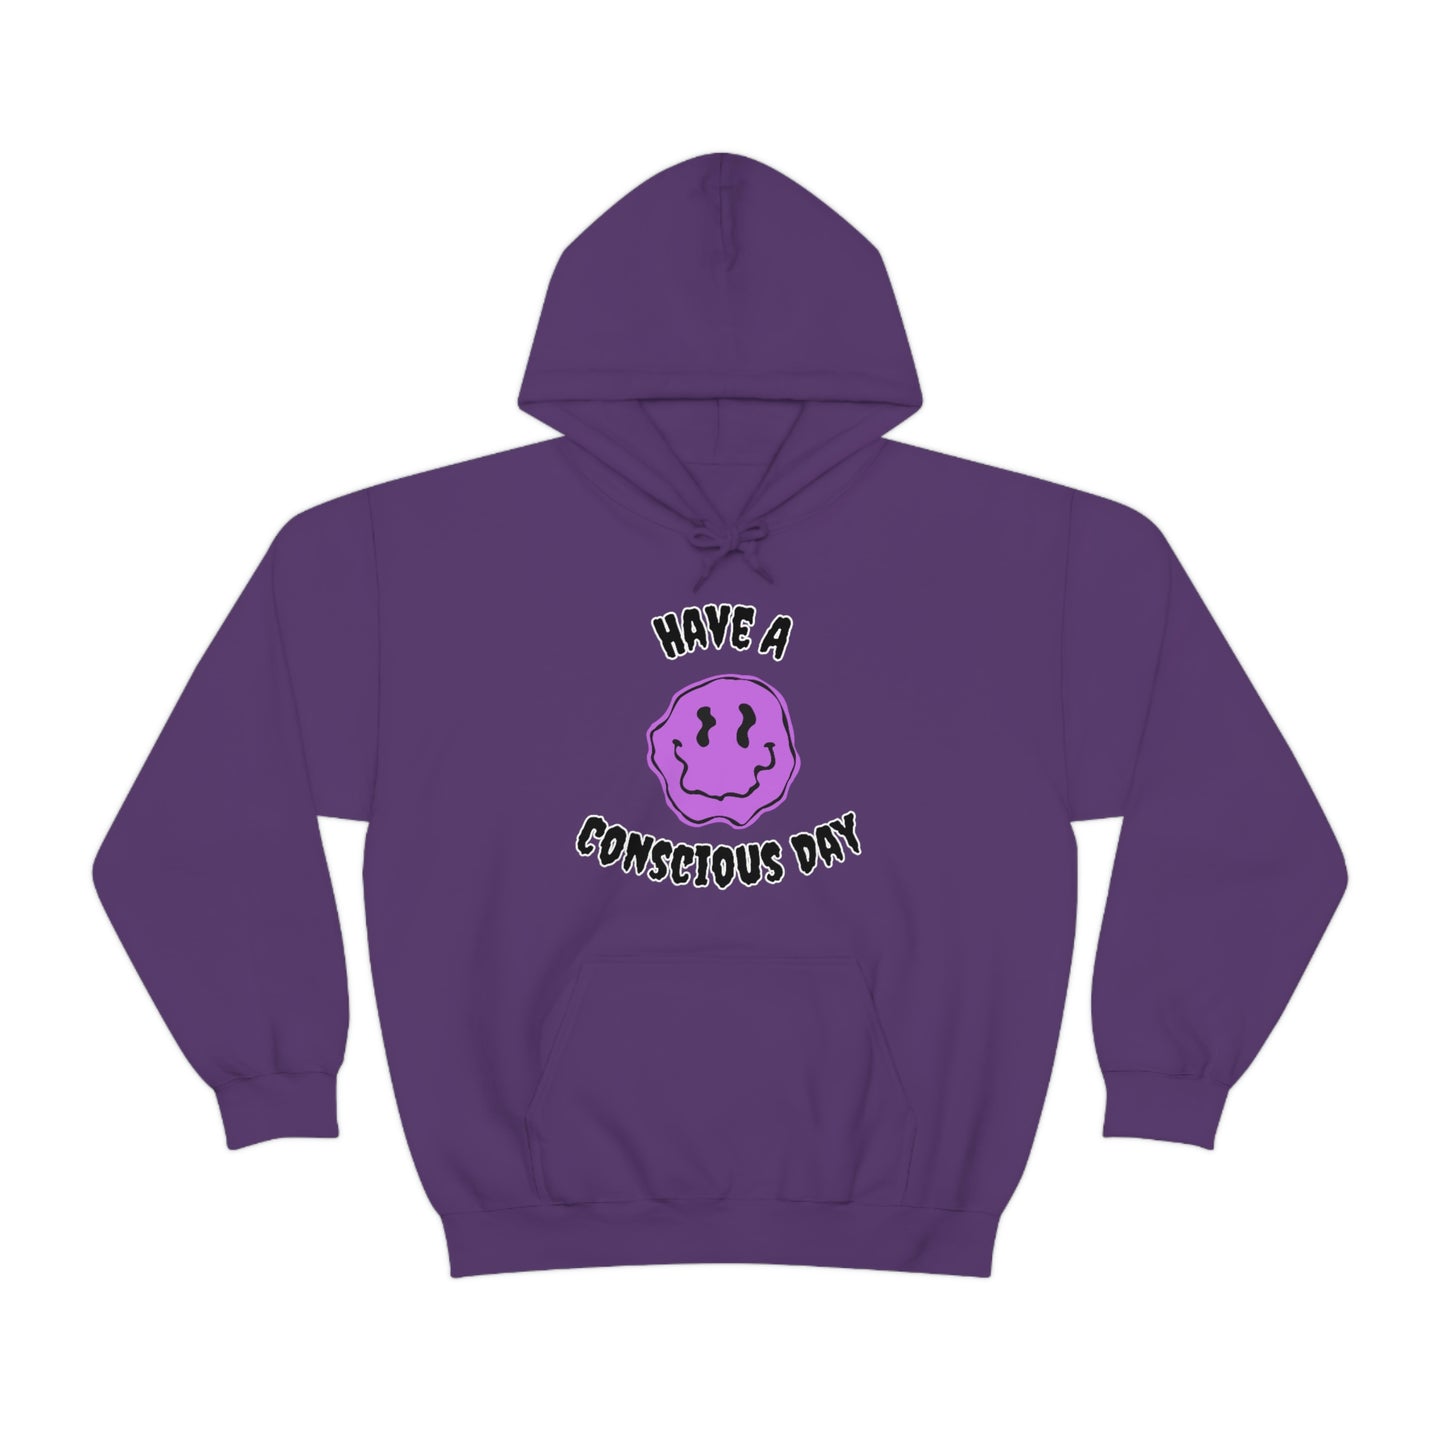 Conscious Day Hoodie - Conscious tees inc.